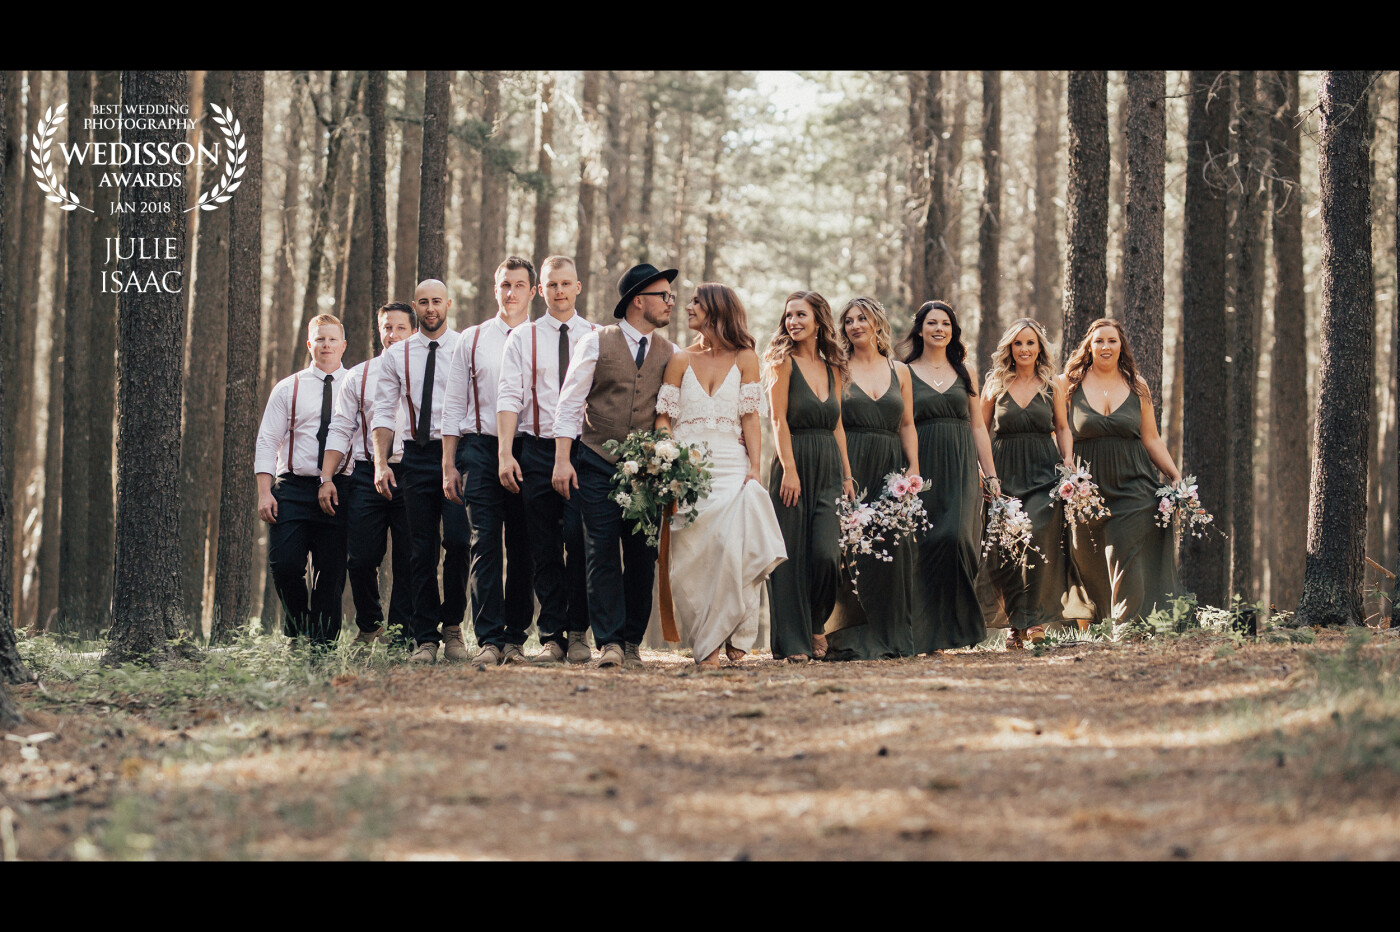 This fairytale wedding in the enchanted forest of Cypress Hills, SK had everyone feeling the magic that is love. As the bridal party walked through the towering trees, the couple couldn't help but look at each other with wonder in their eyes. 